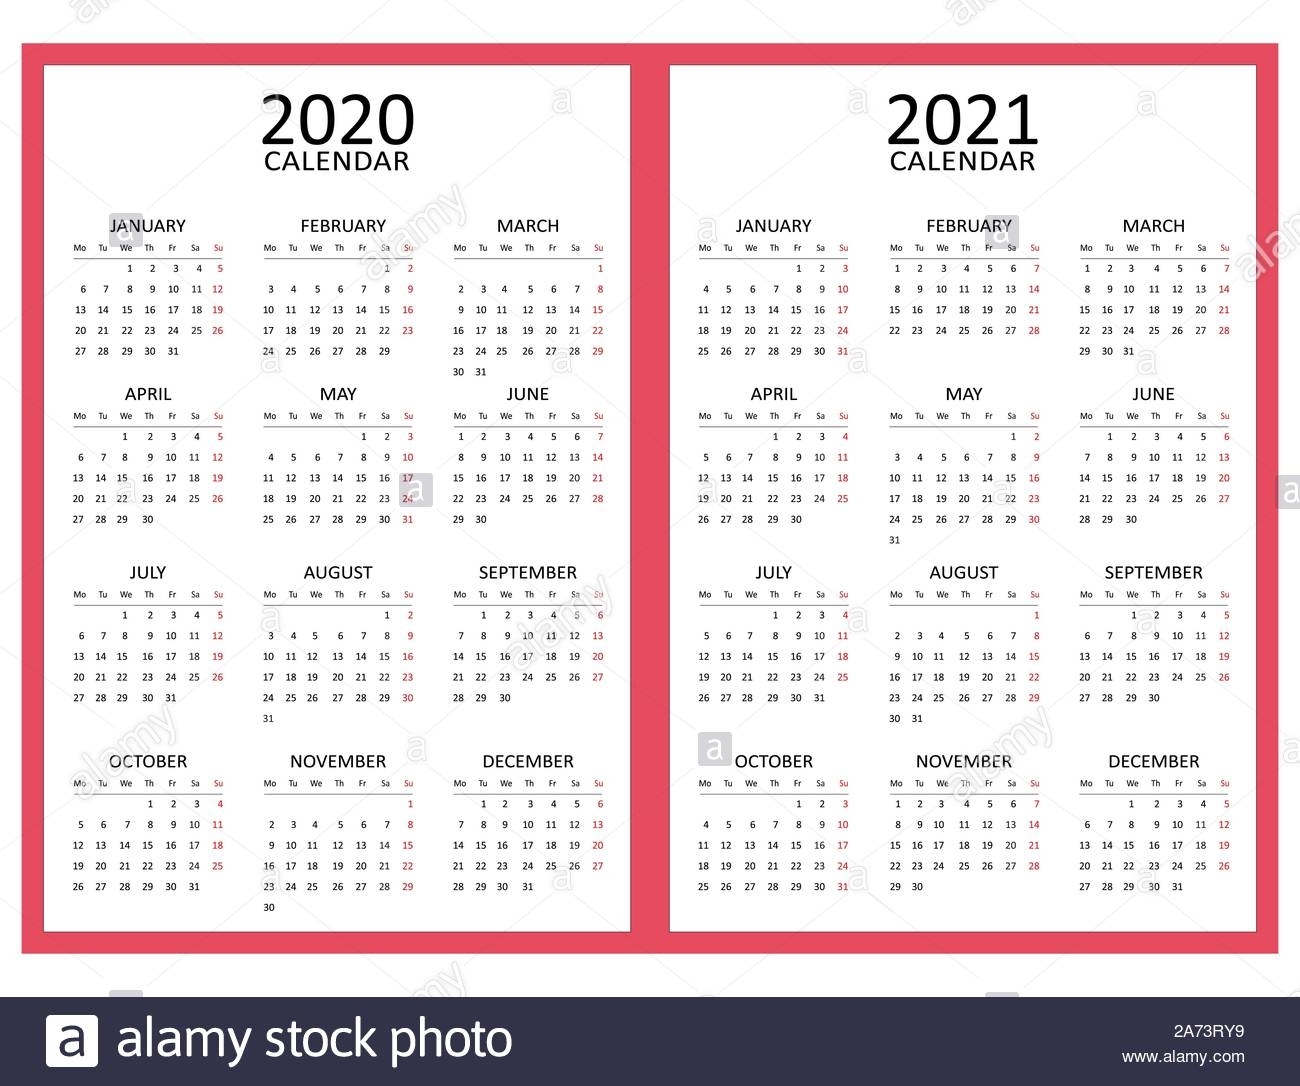 Simple Calendar Layout For Two Years 2020 And 2021. Starts